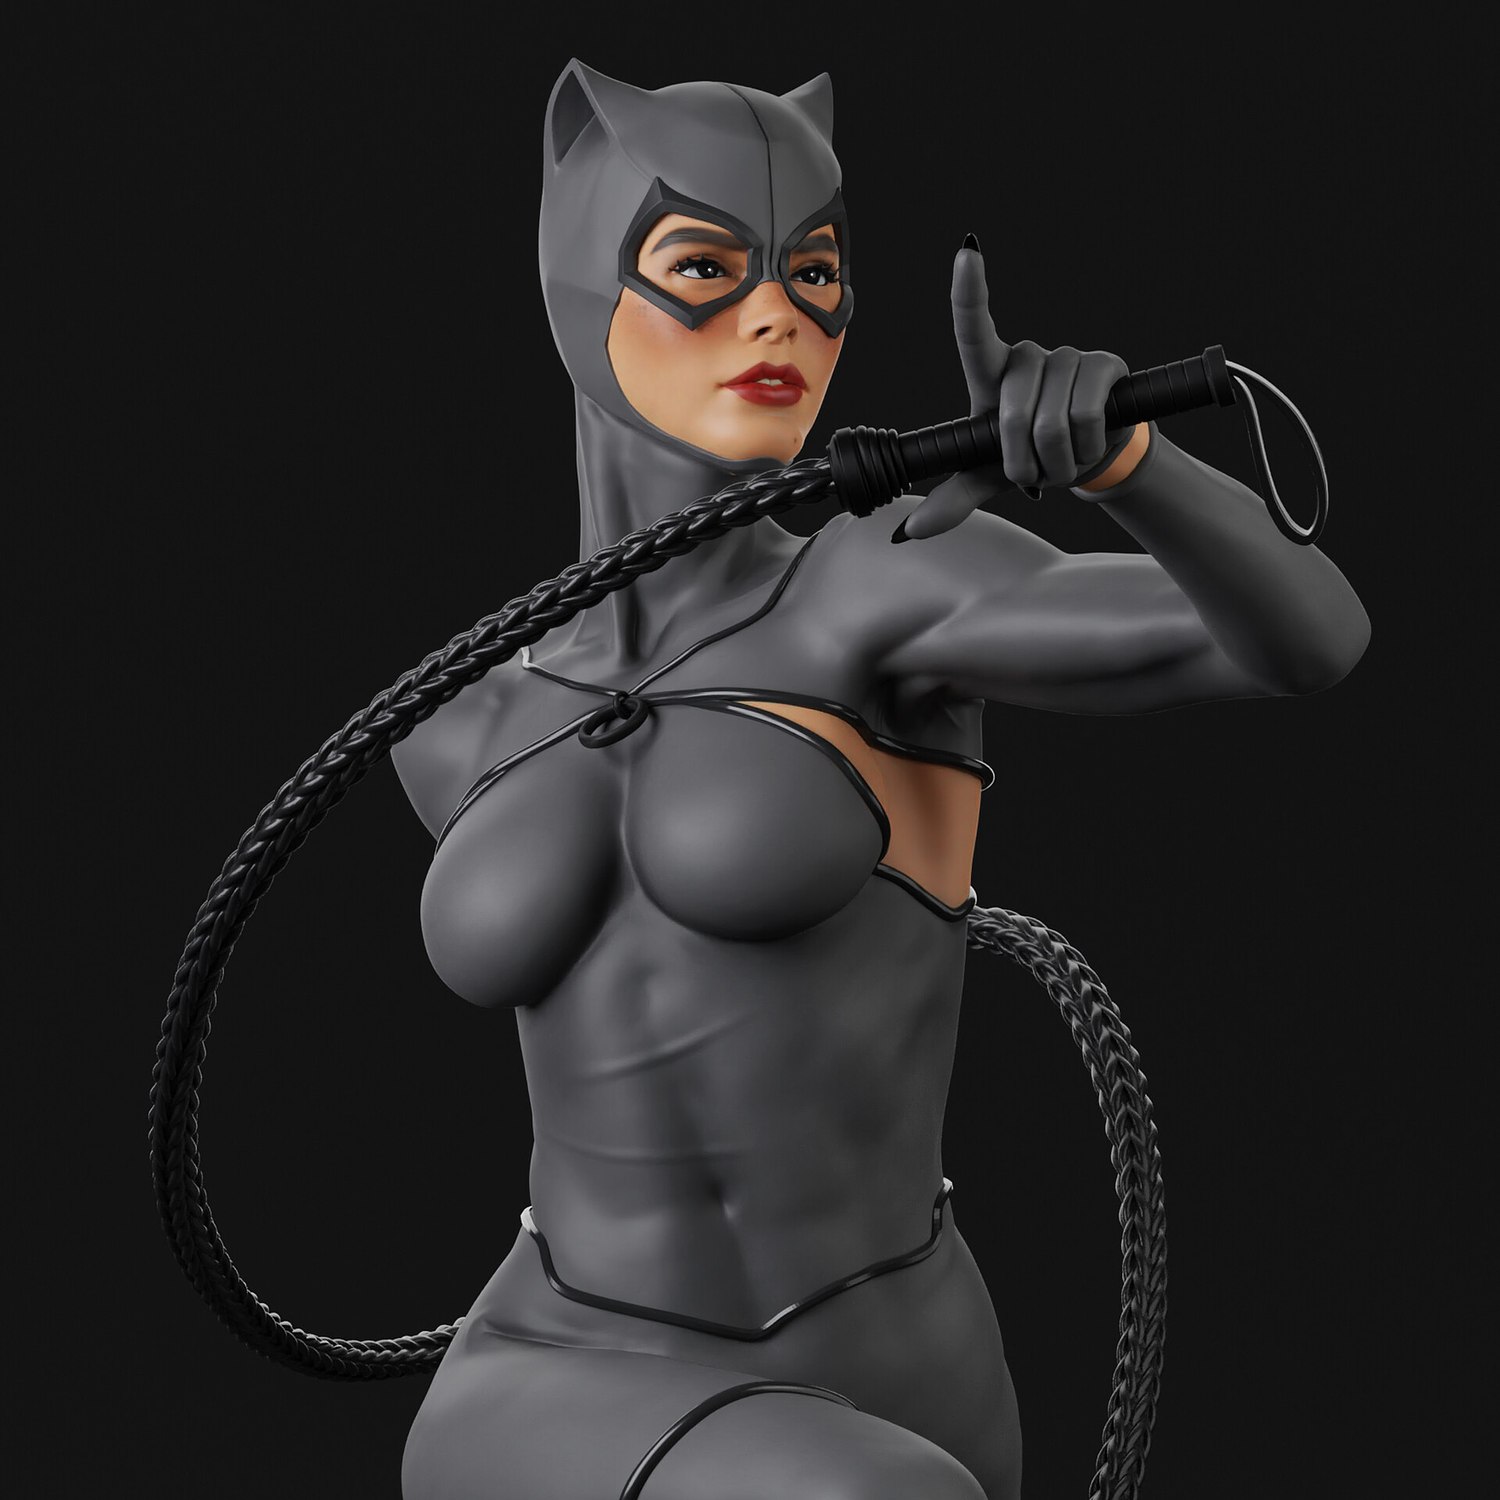 Catwoman with Rope from DC